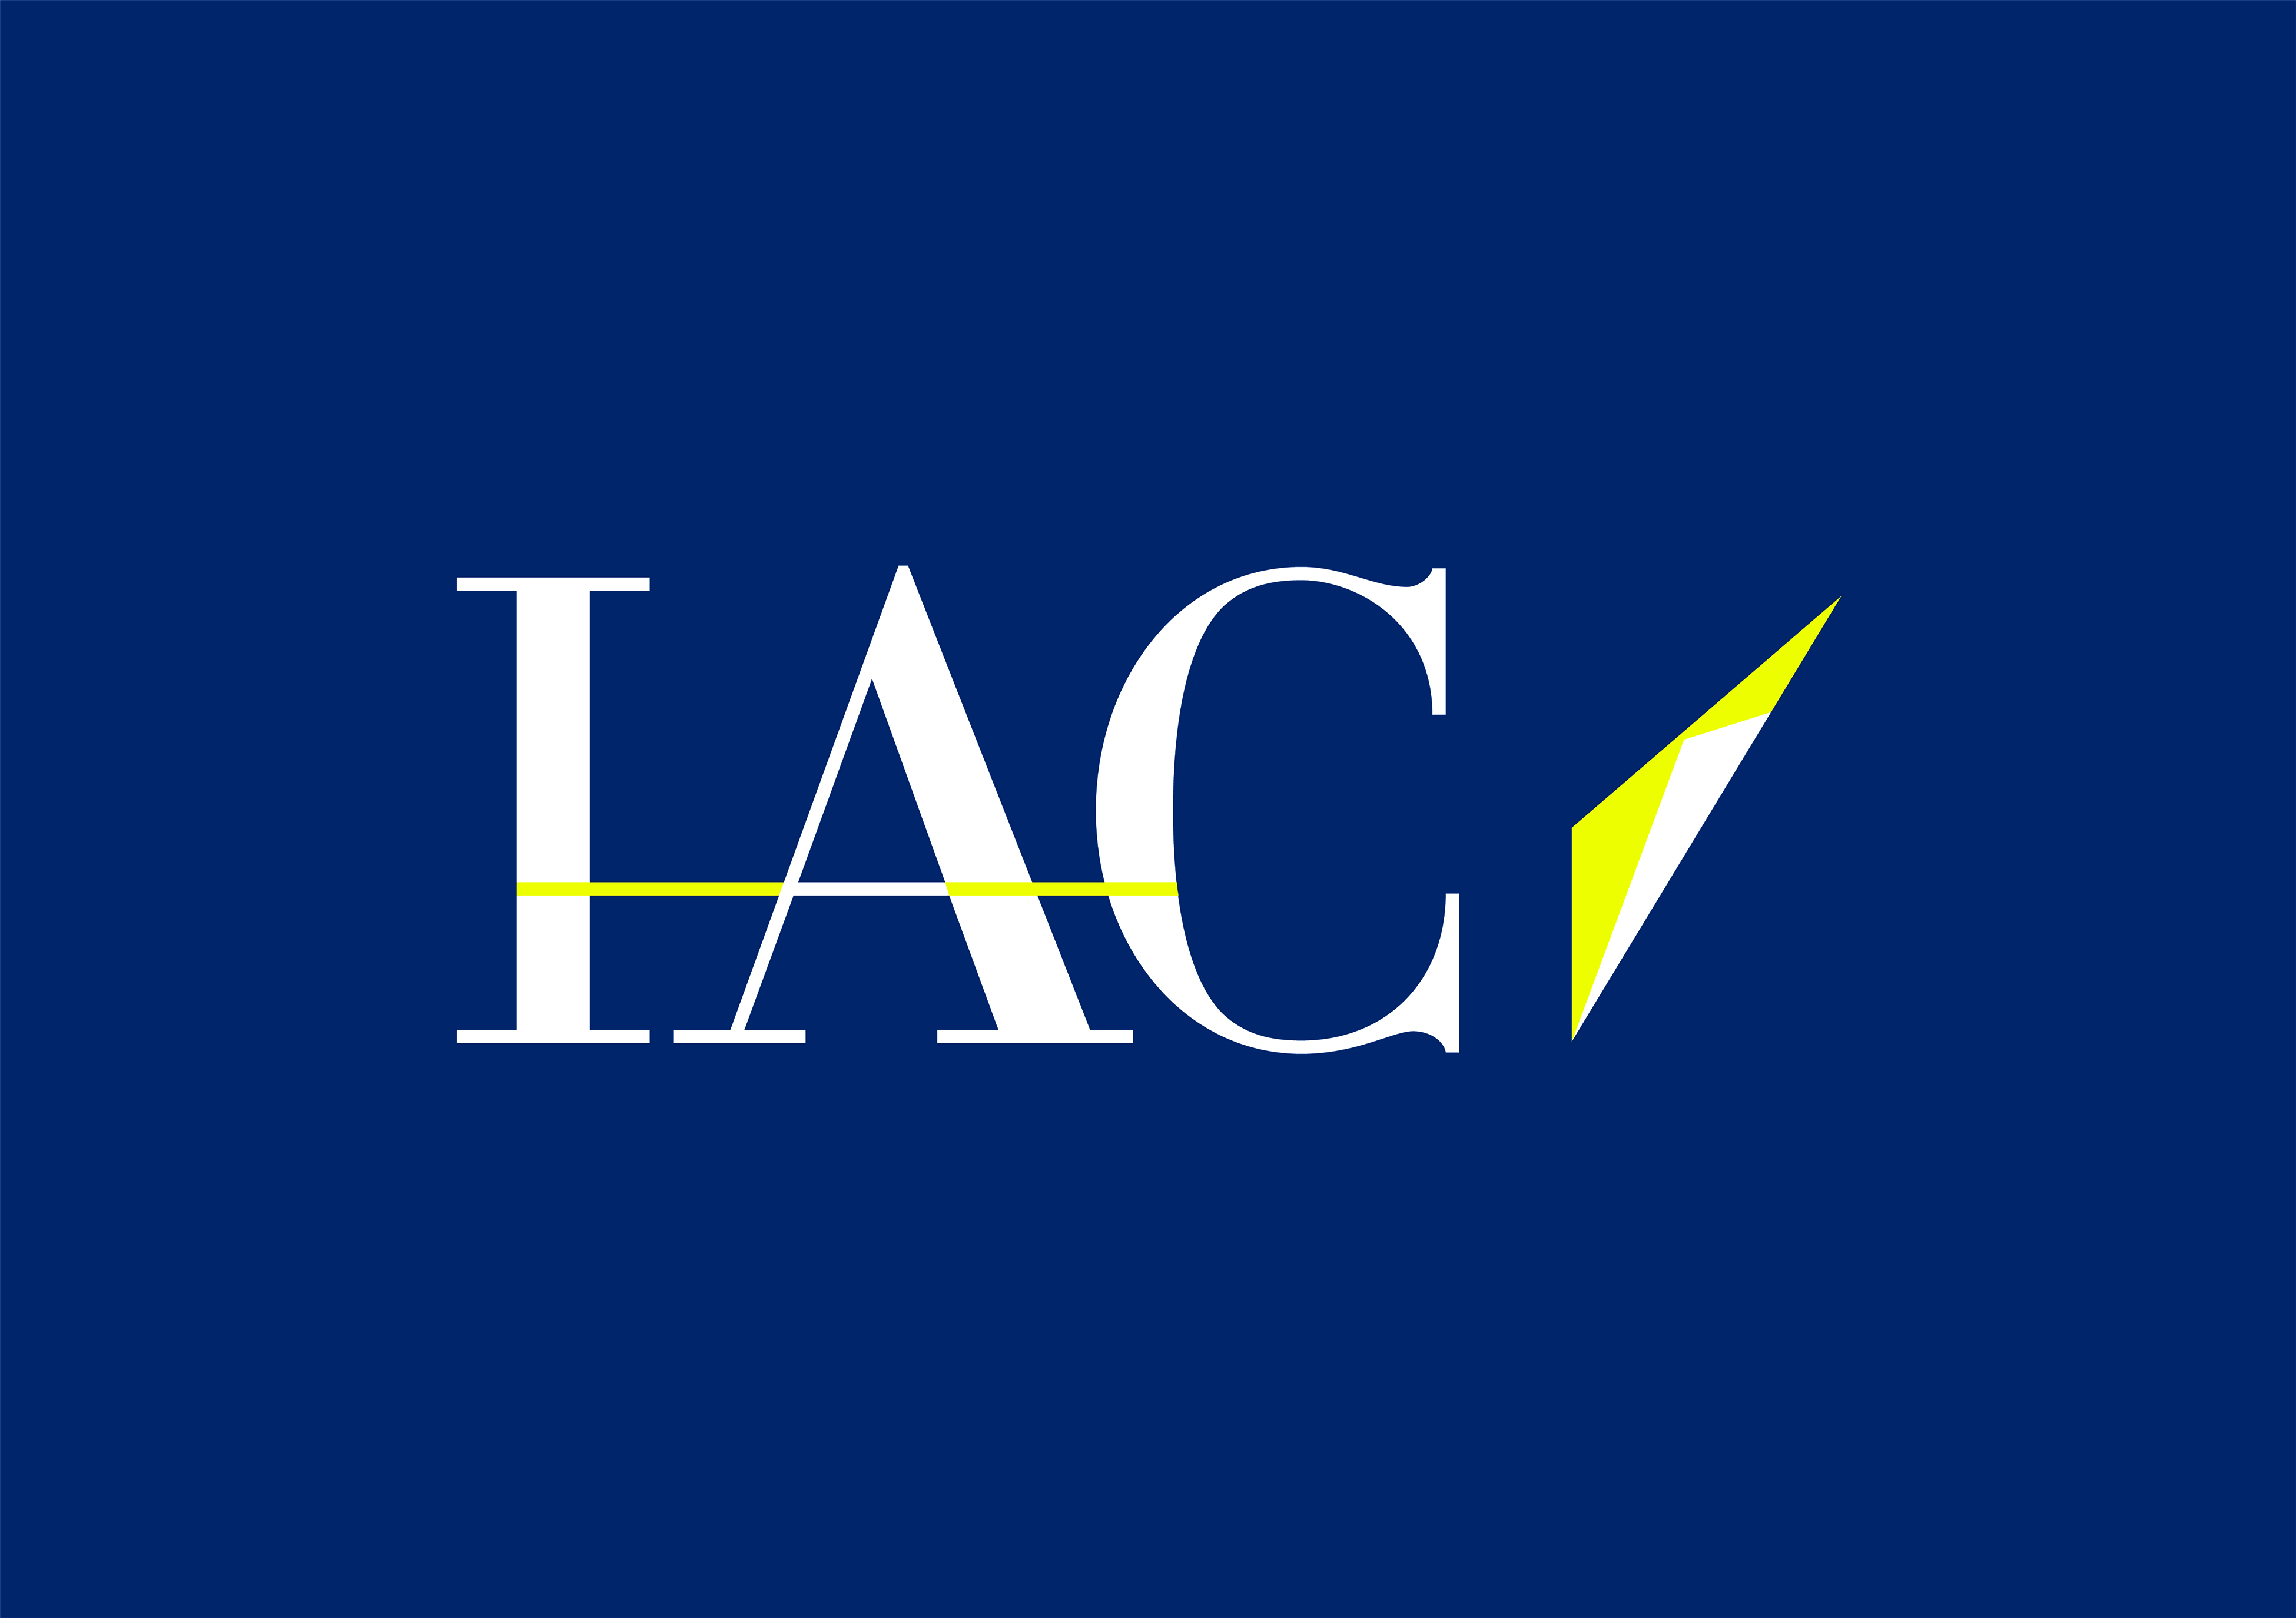 IAC Publishes Q4 and Full Year Financial Results